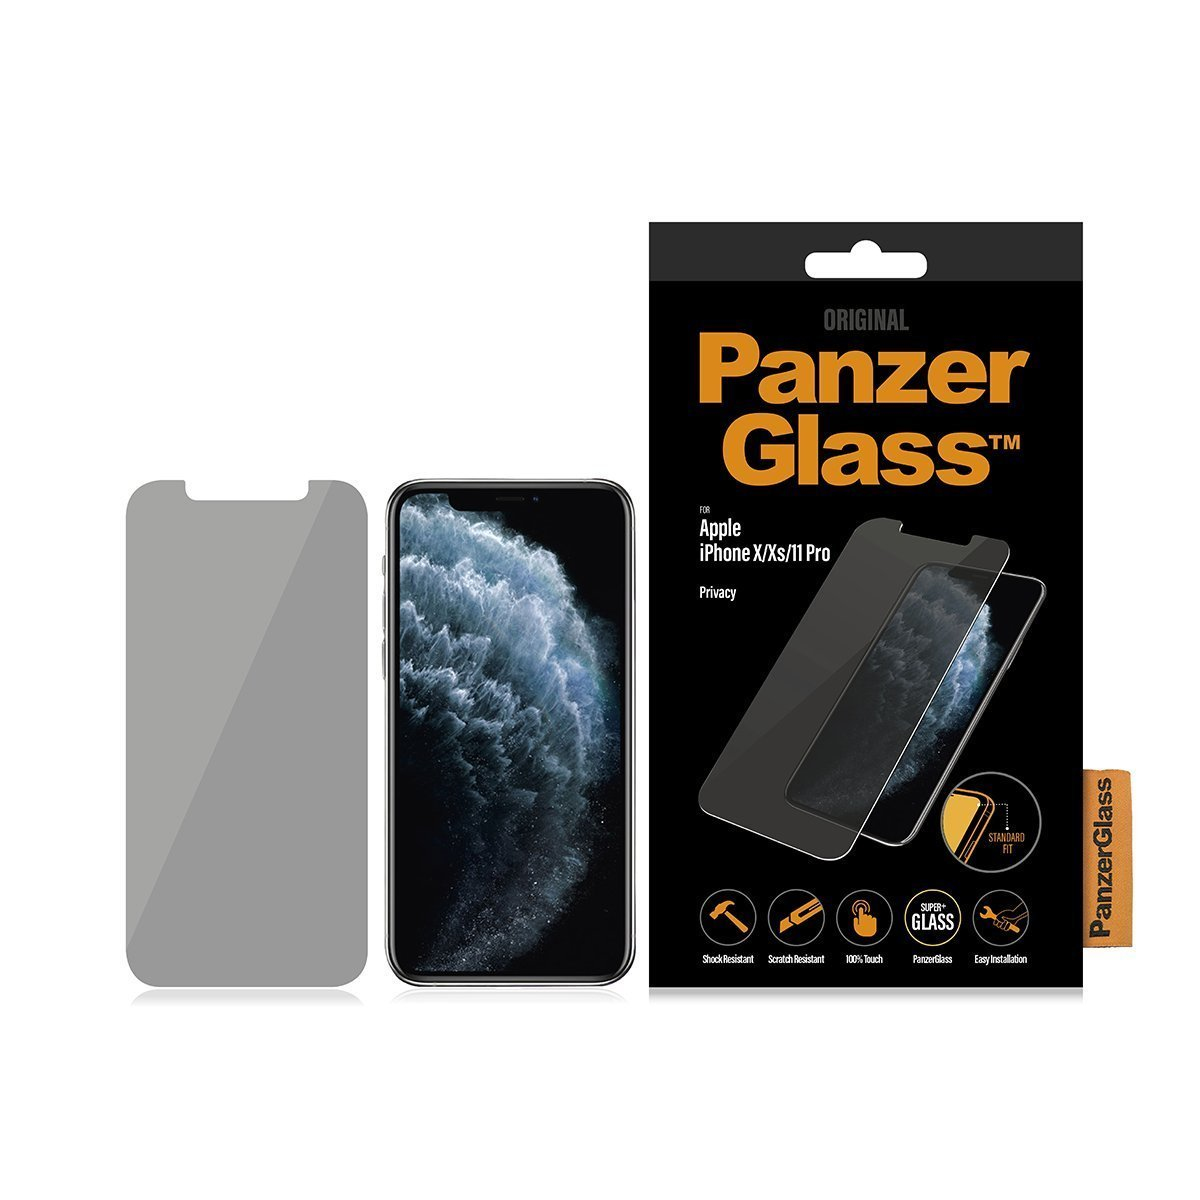 Panzerglass Standard Fit Privacy for iPhone 11 Pro